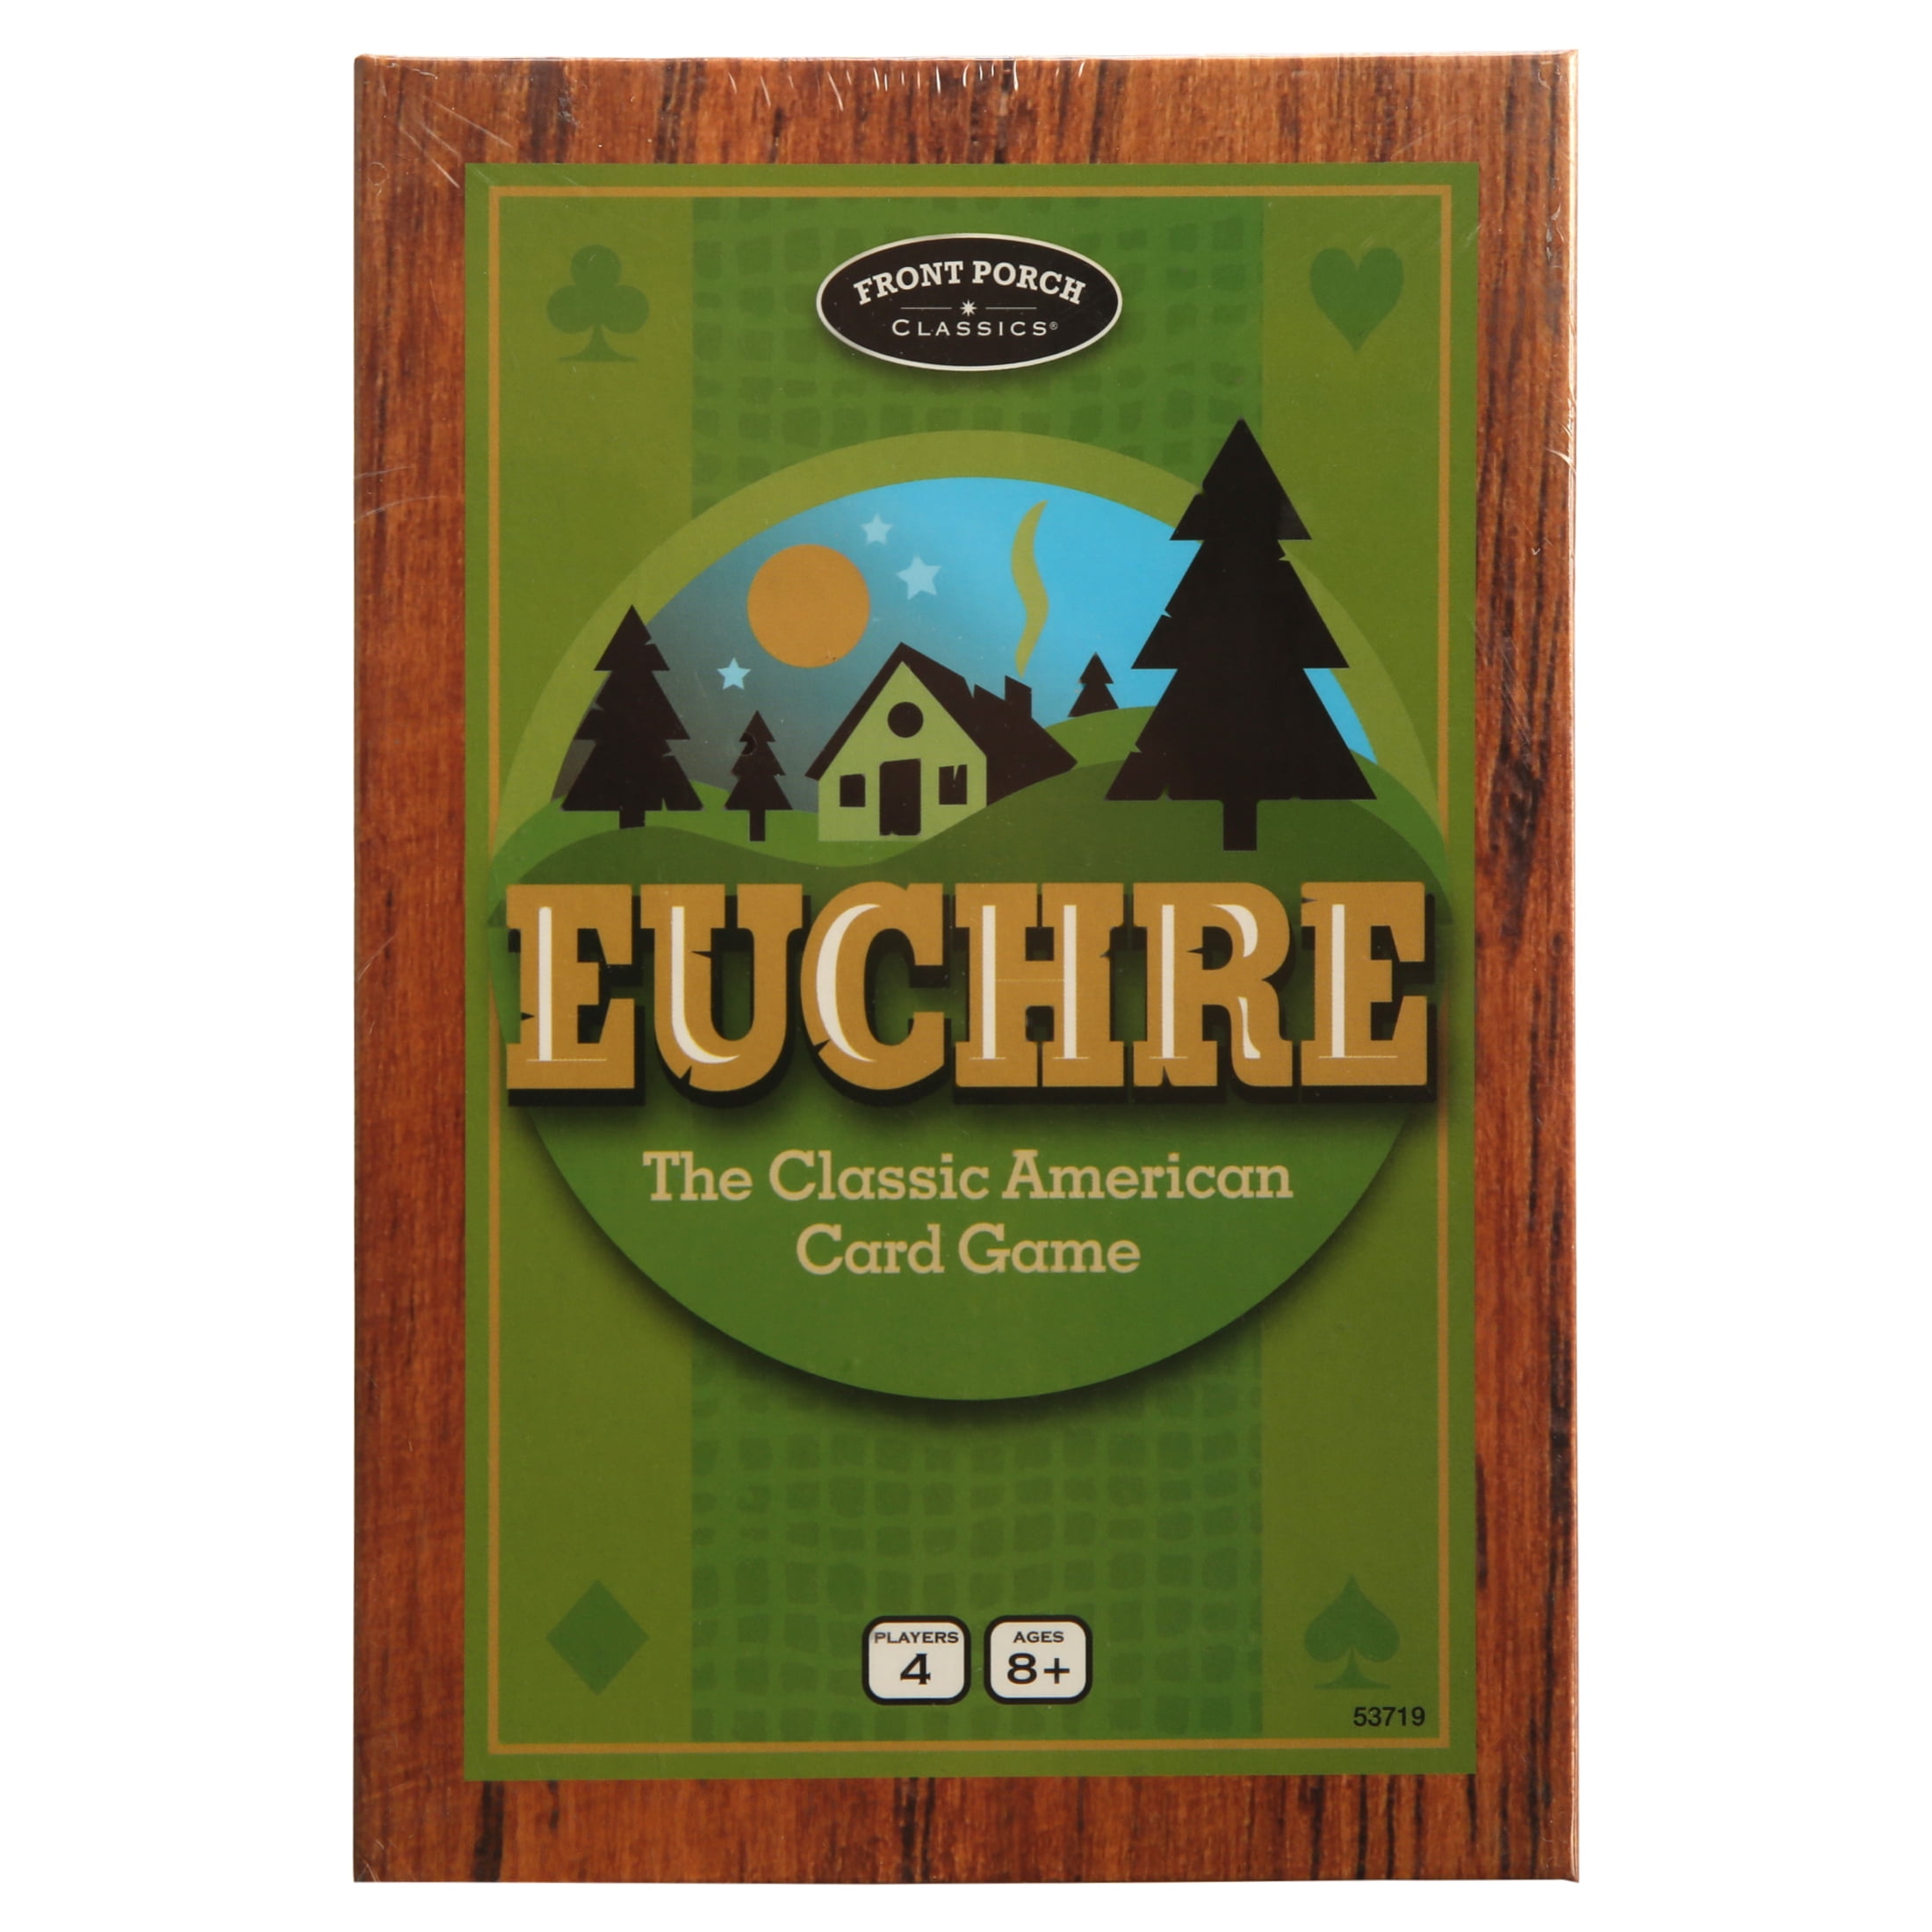 Euchre The Classic American 4 Player Card Game 2013 Ages 8 for sale online 